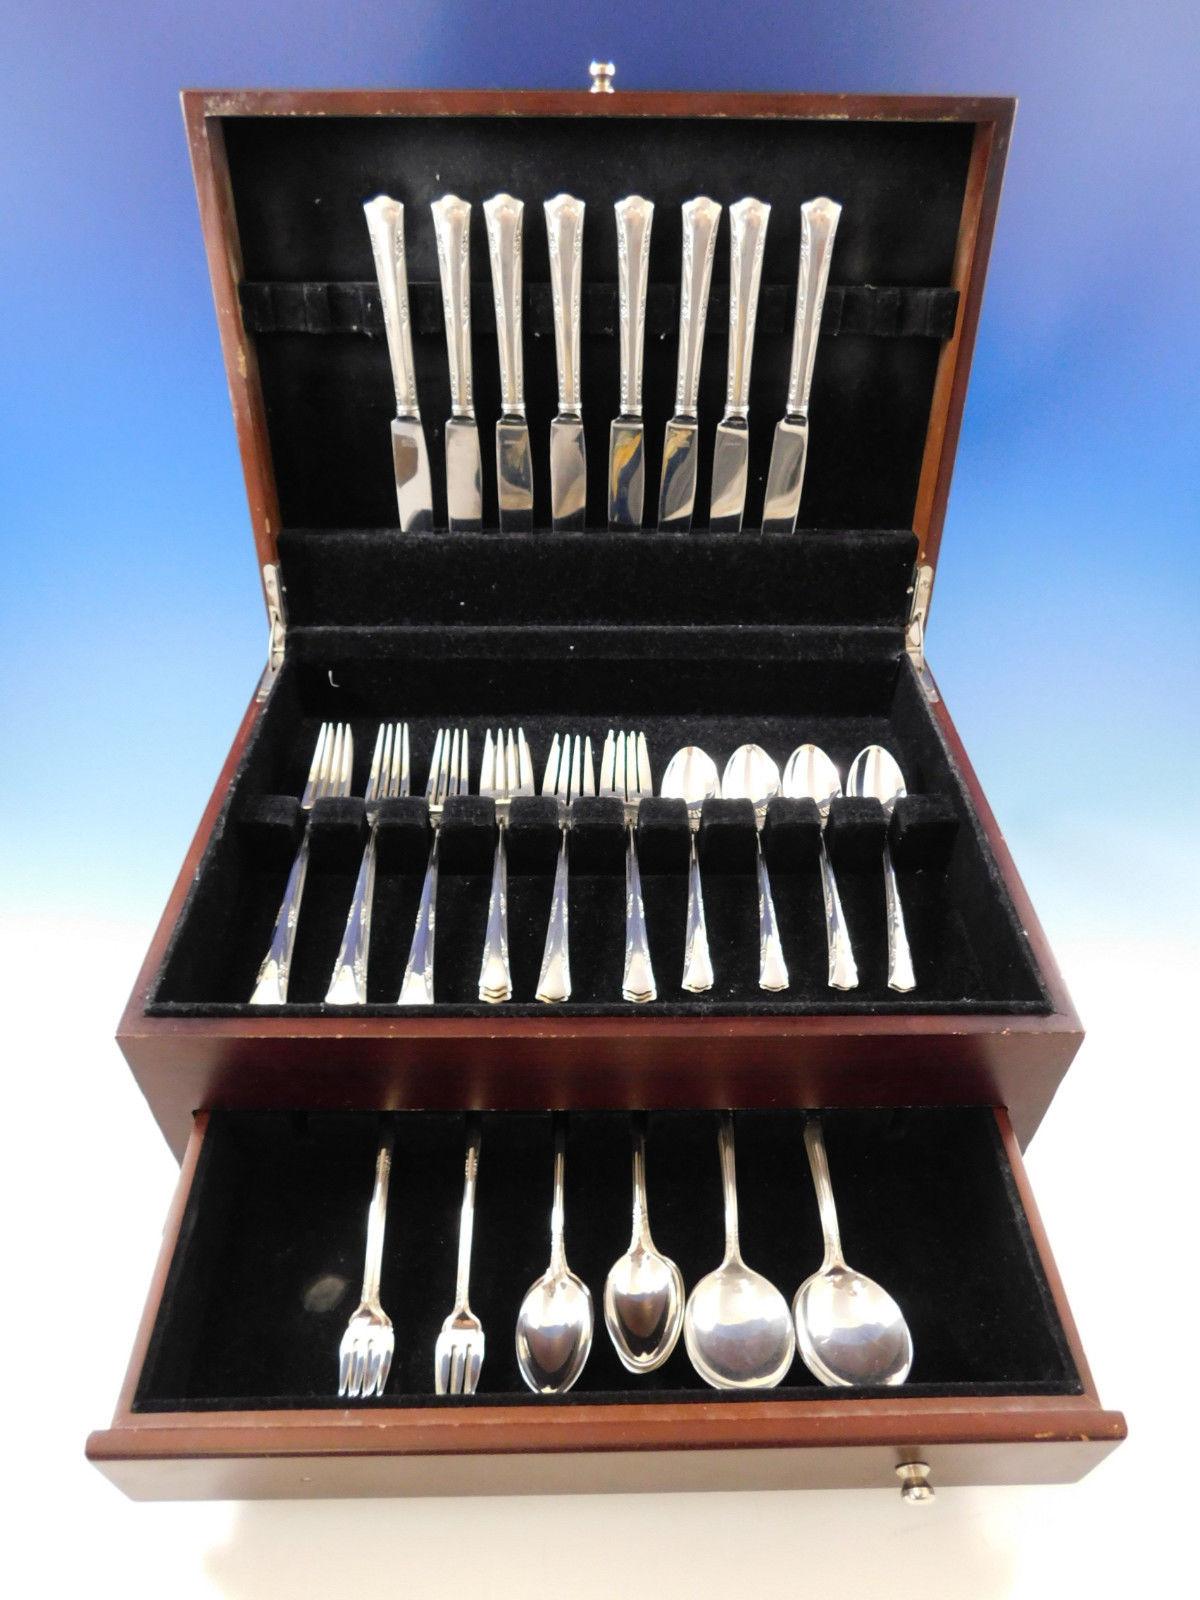 Heirloom quality Greenbrier by Gorham sterling silver flatware set - 56 pieces. This set includes:

8 knives, 8 7/8